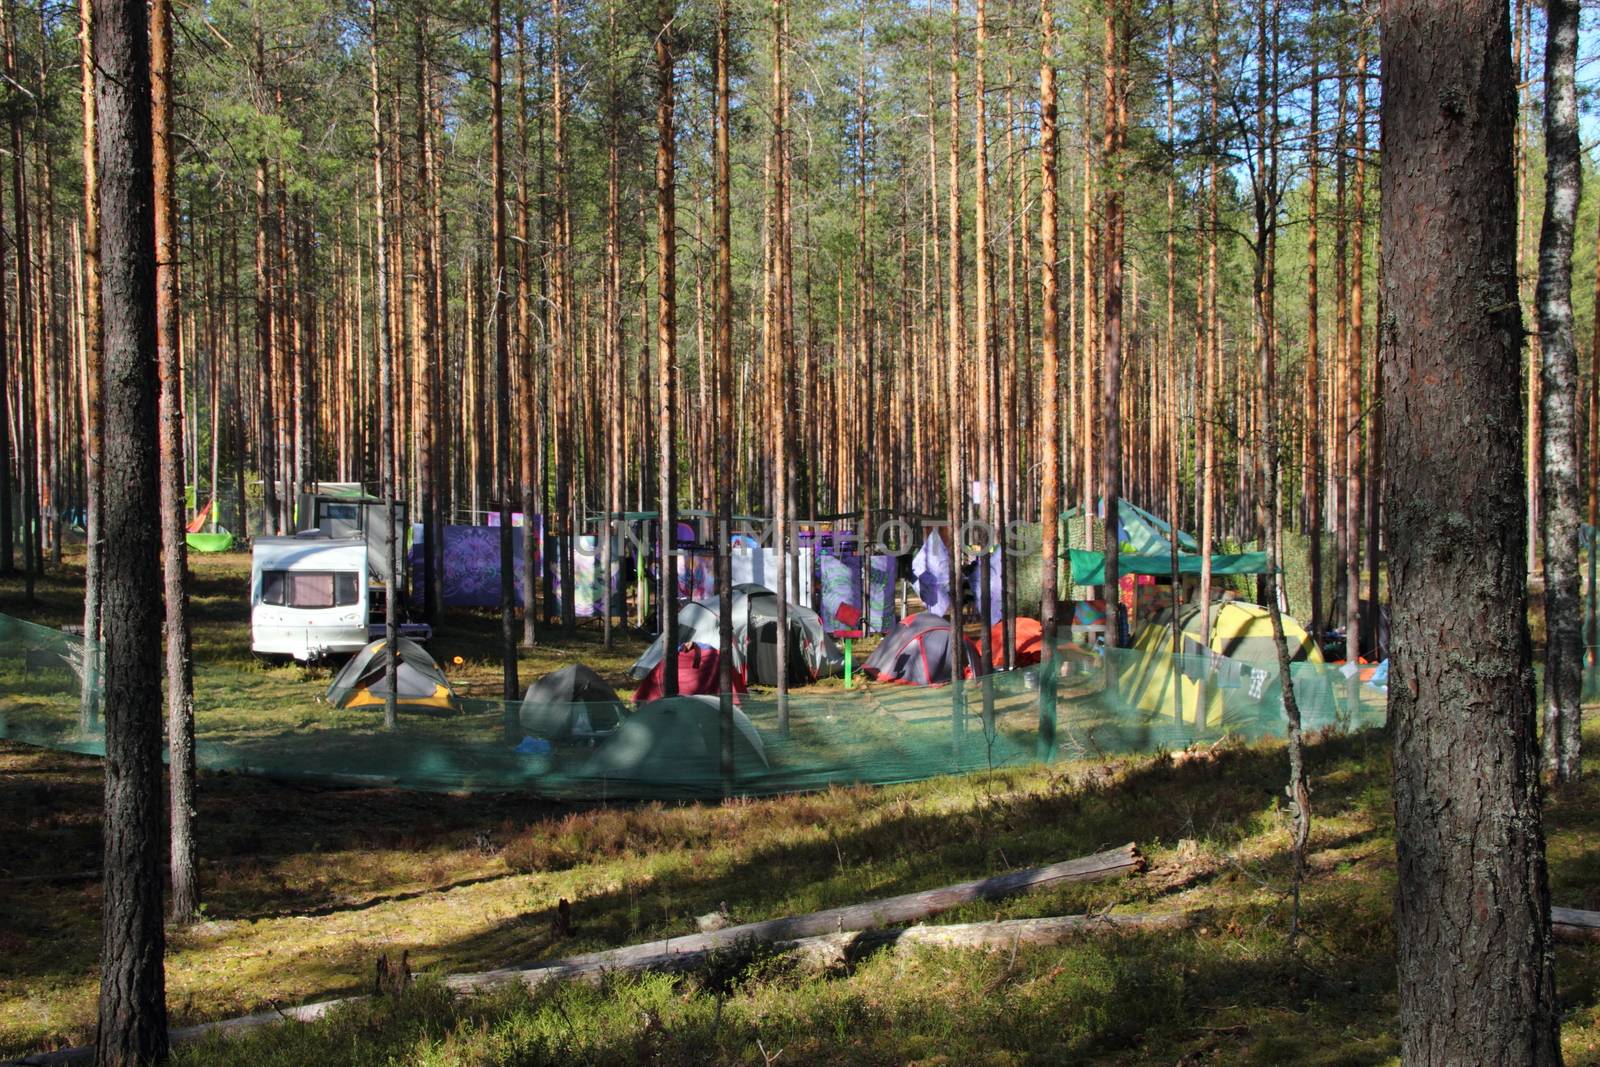 Camping in a pine forest. Many tents and trailers